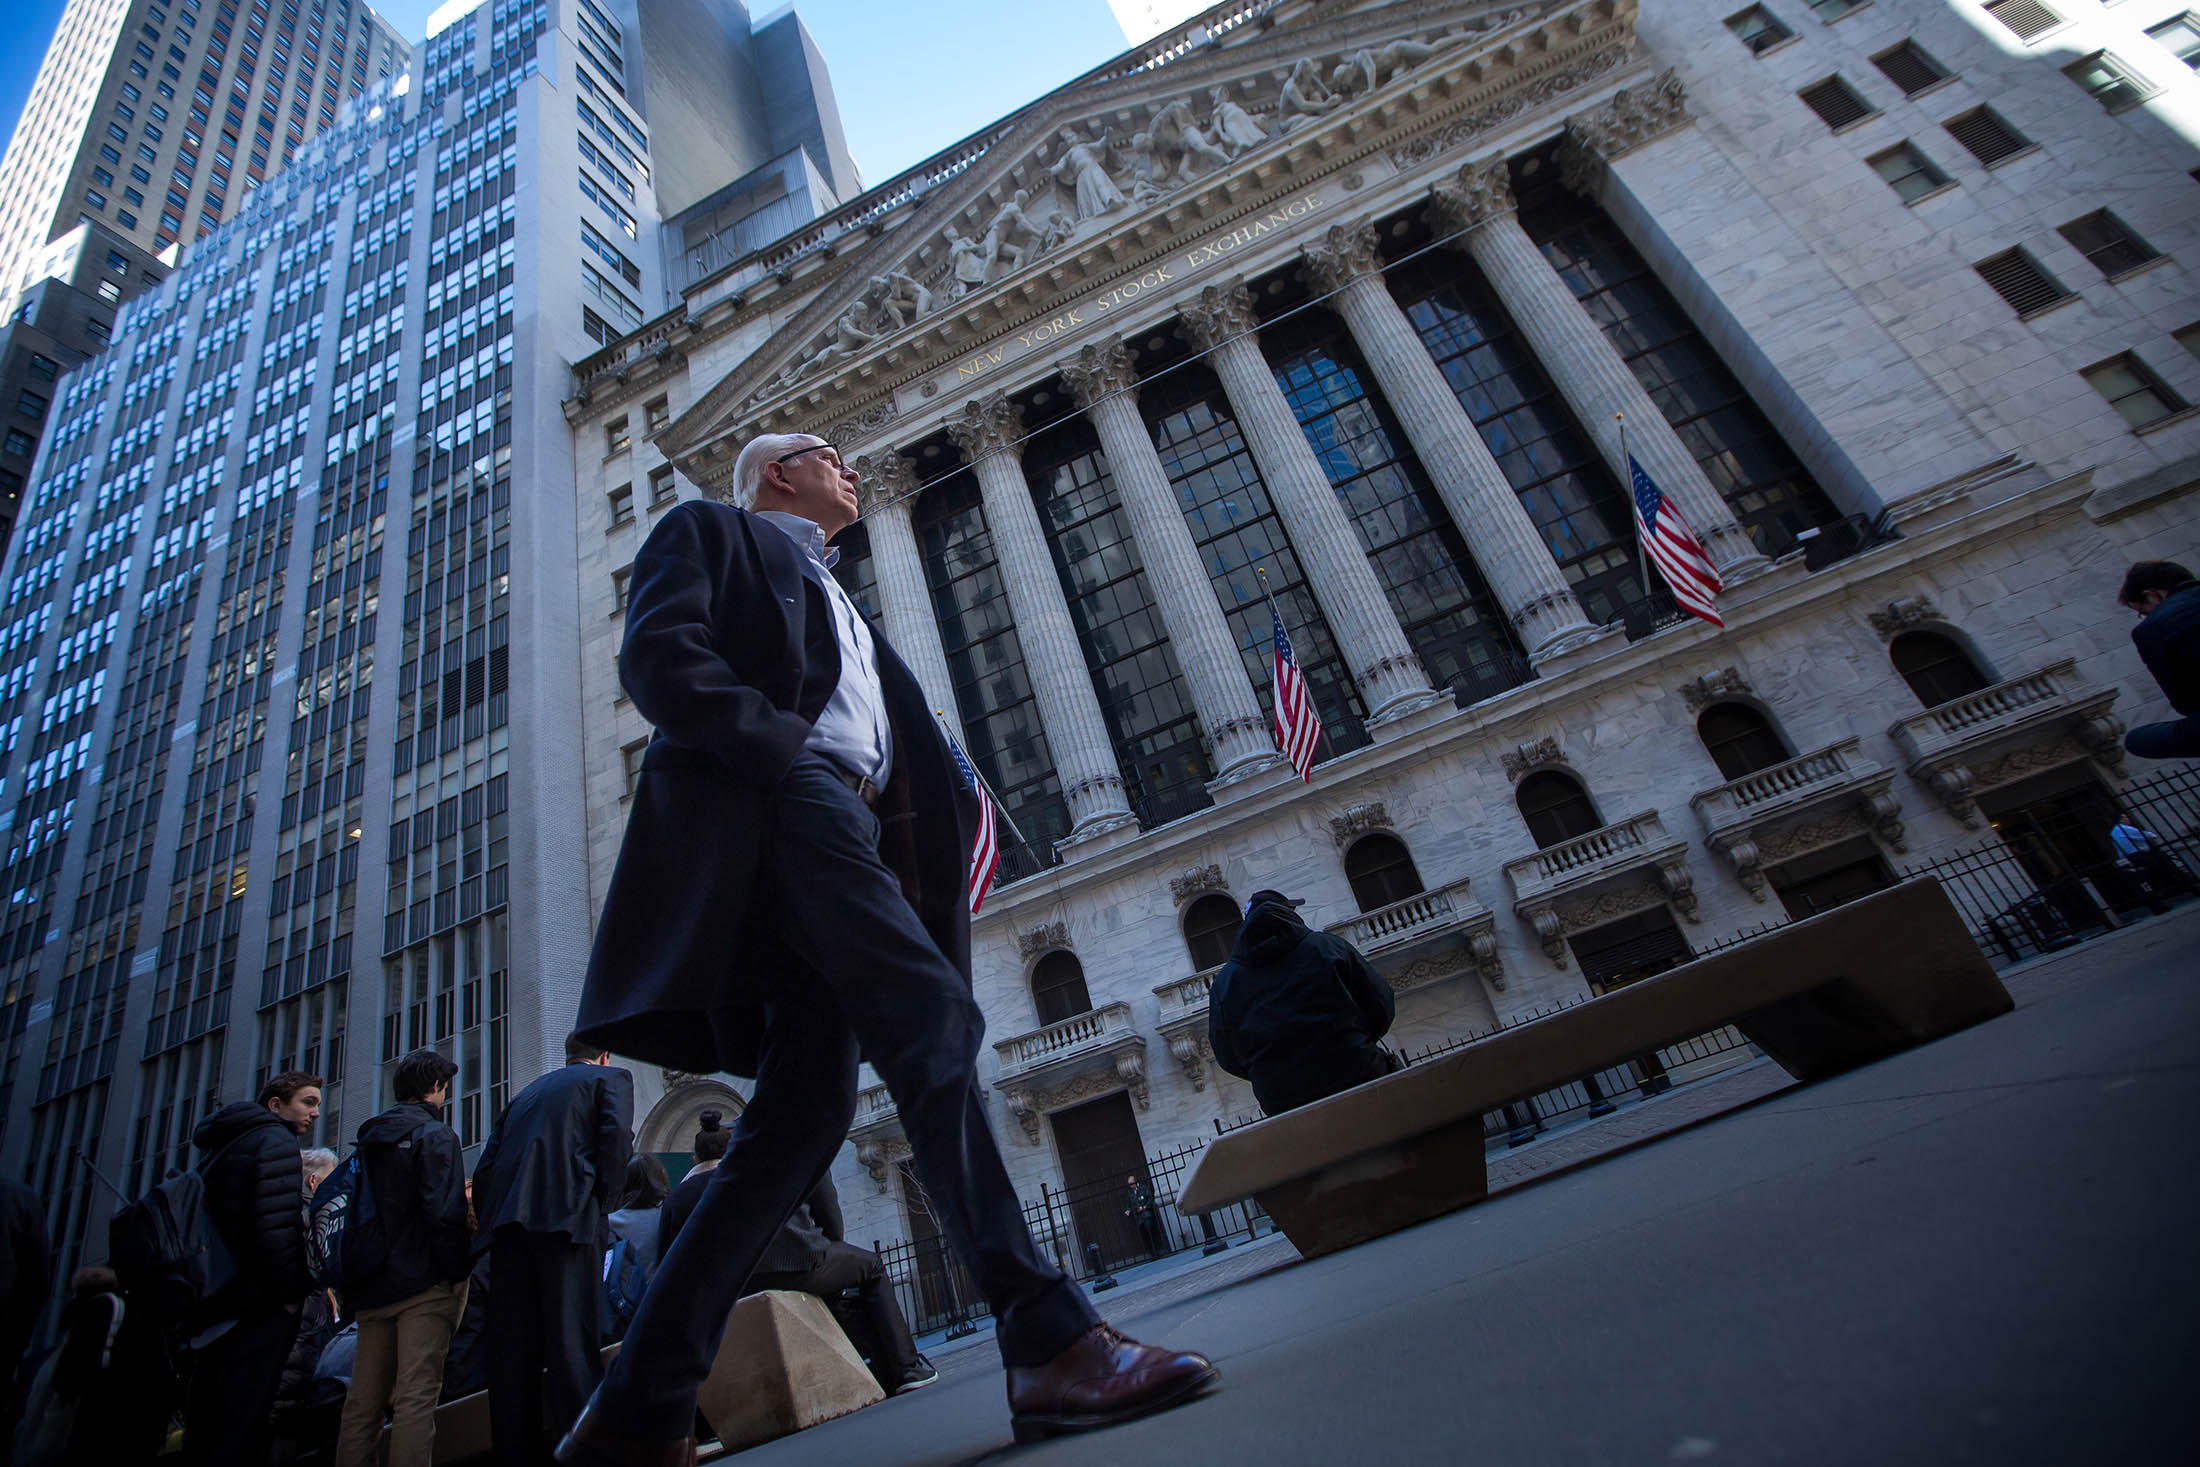 Trading At The NYSE As Emerging Markets Lead Stocks Higher